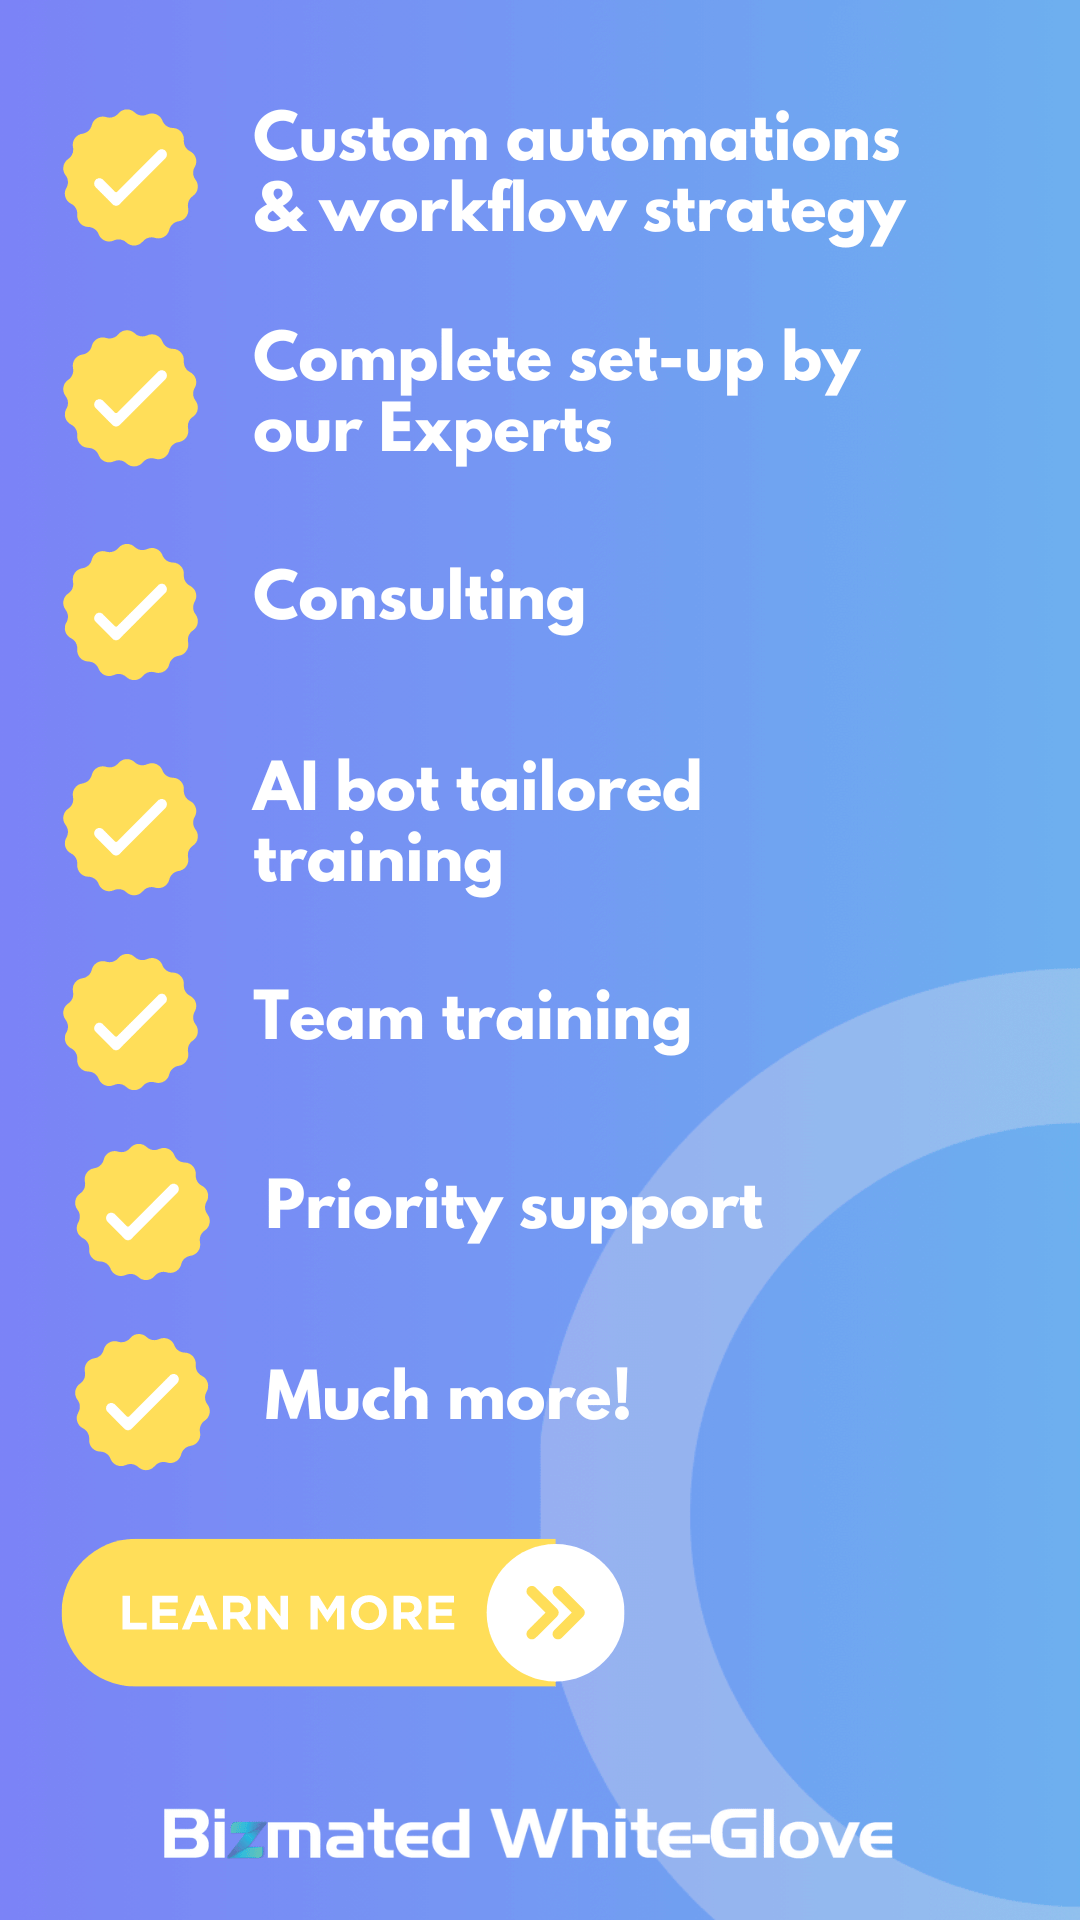 Blue and yellow banner with a list of services offered by Binnated White-Glove, including custom automation, workflow strategy, expert setup, and more.